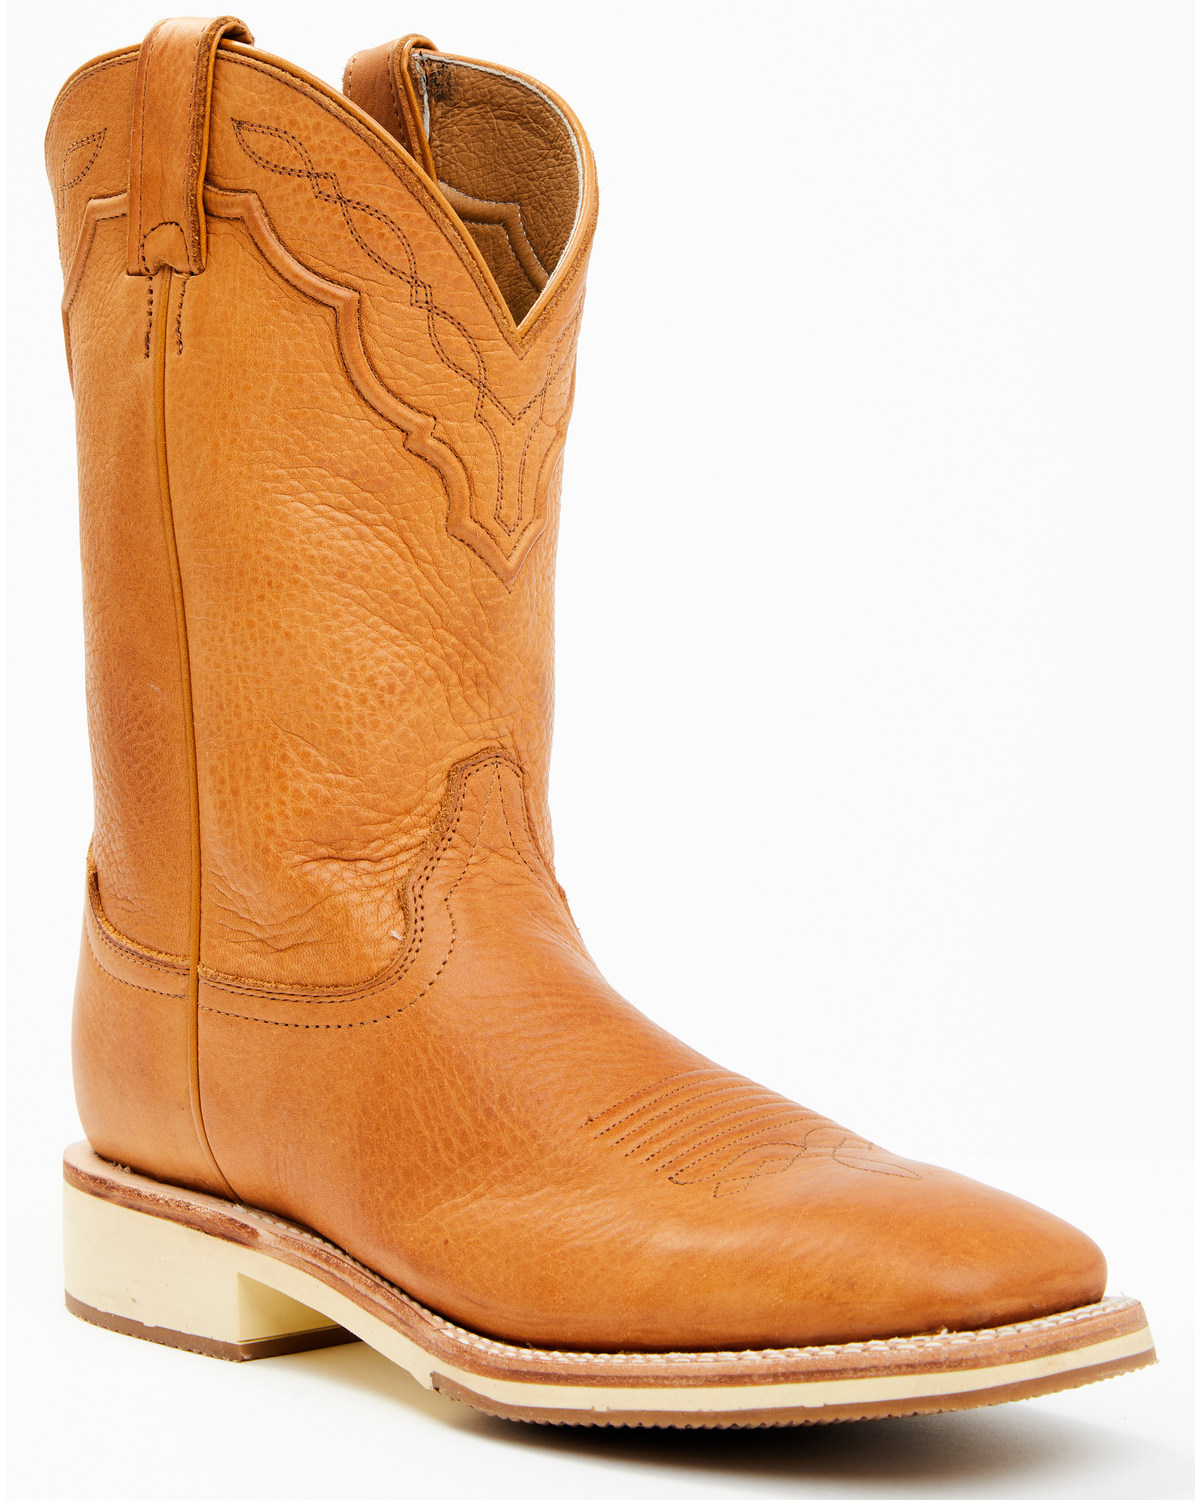 RANK 45® Men's Crepe Western Performance Boots - Broad Square Toe